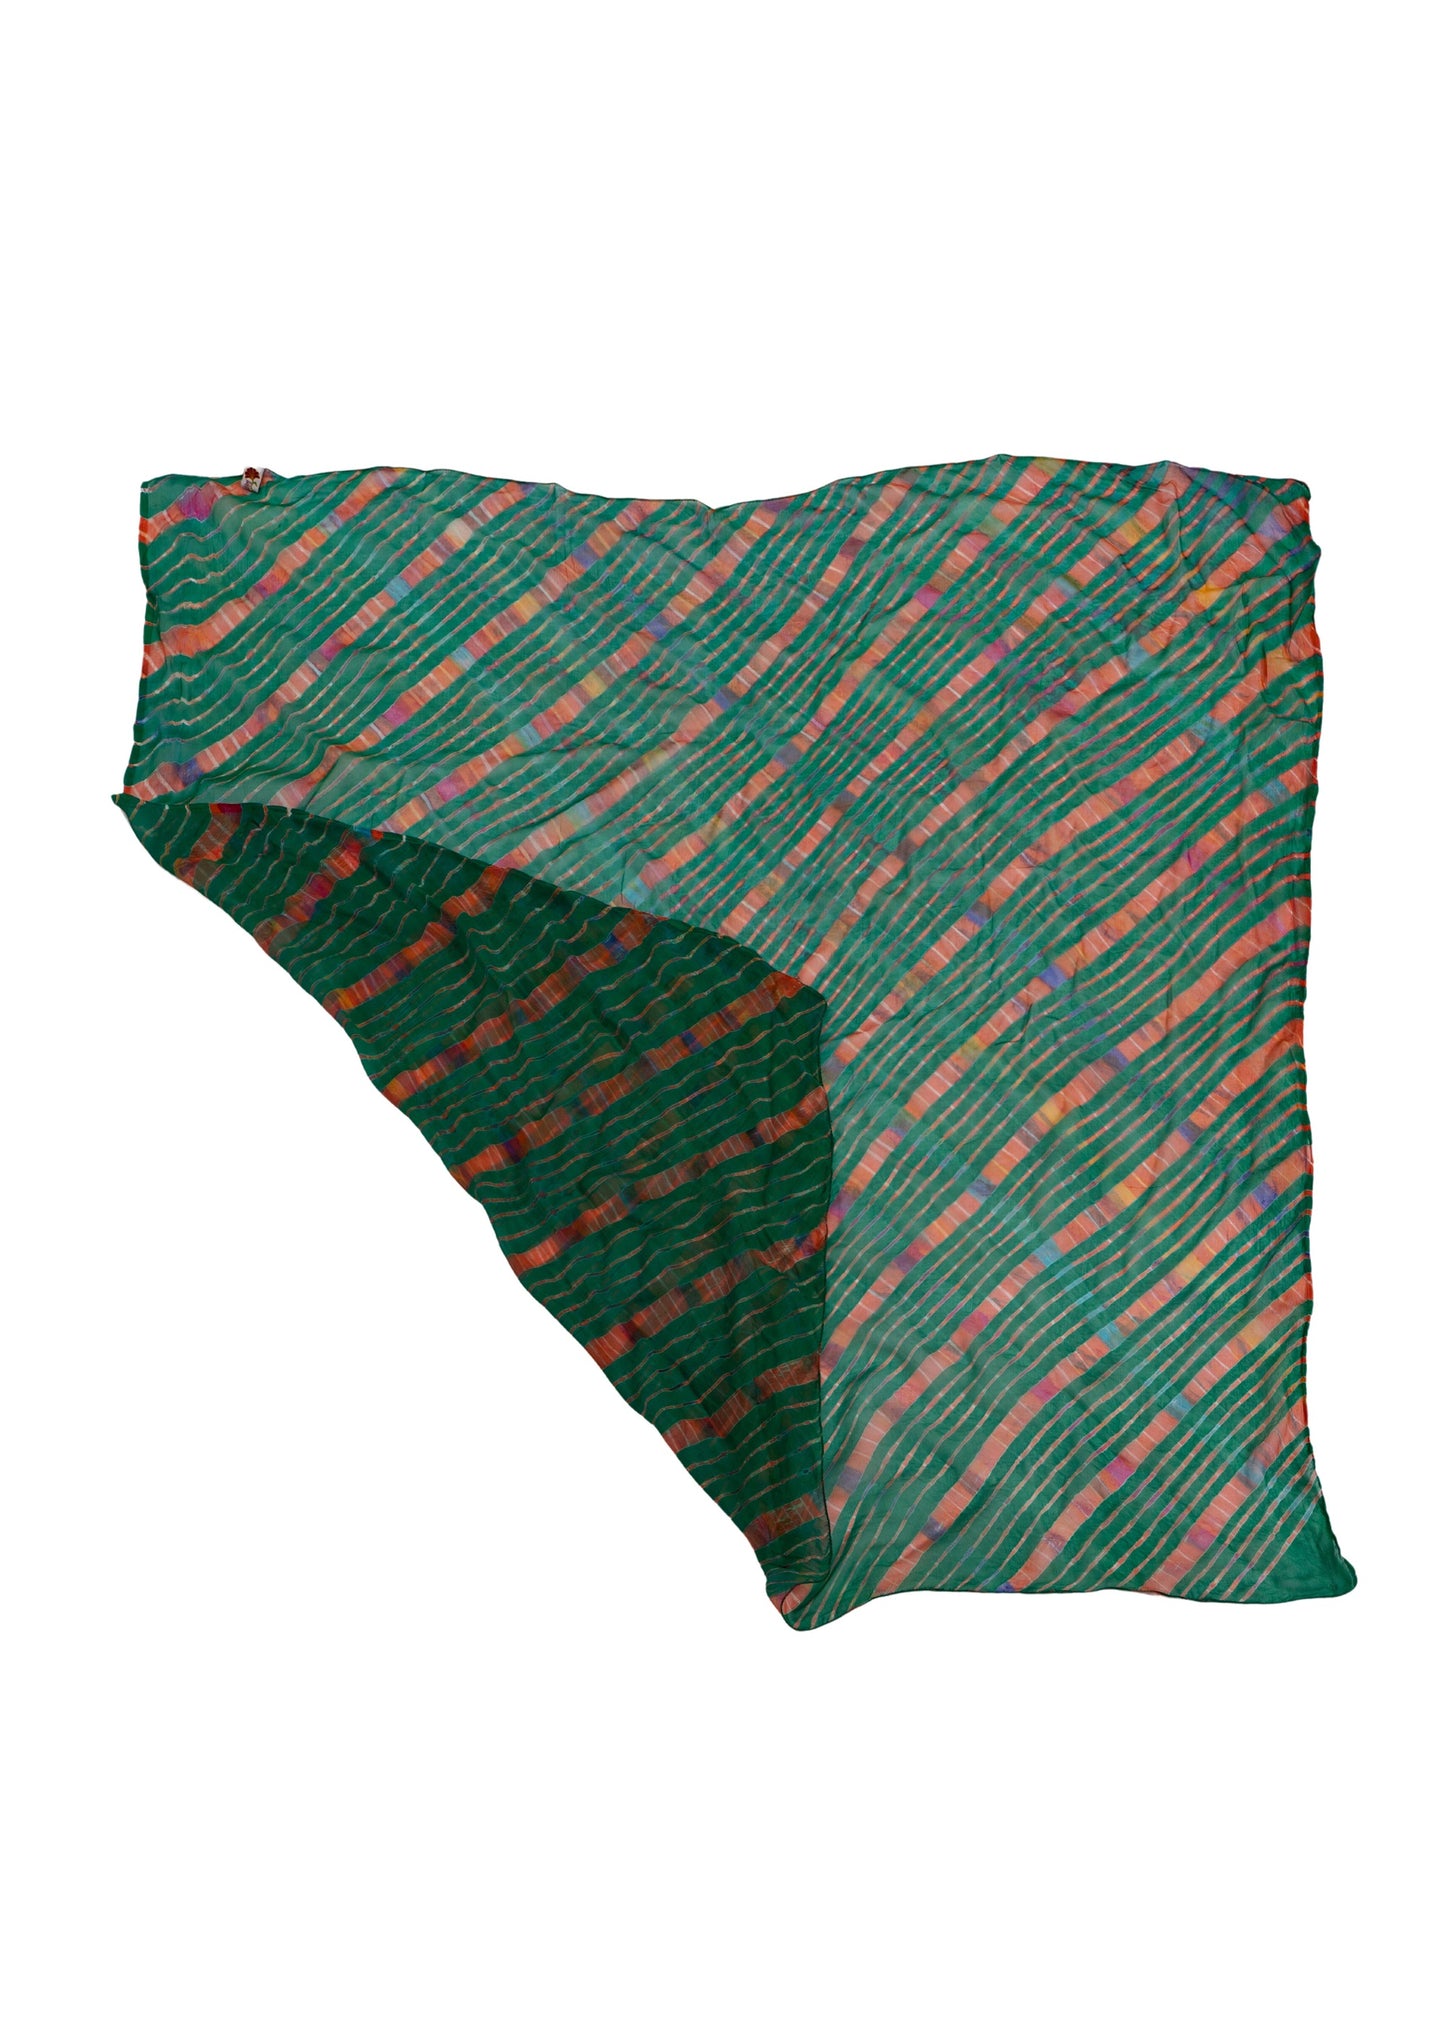 Square scarf in silk chiffon with manual dyeing in dark green